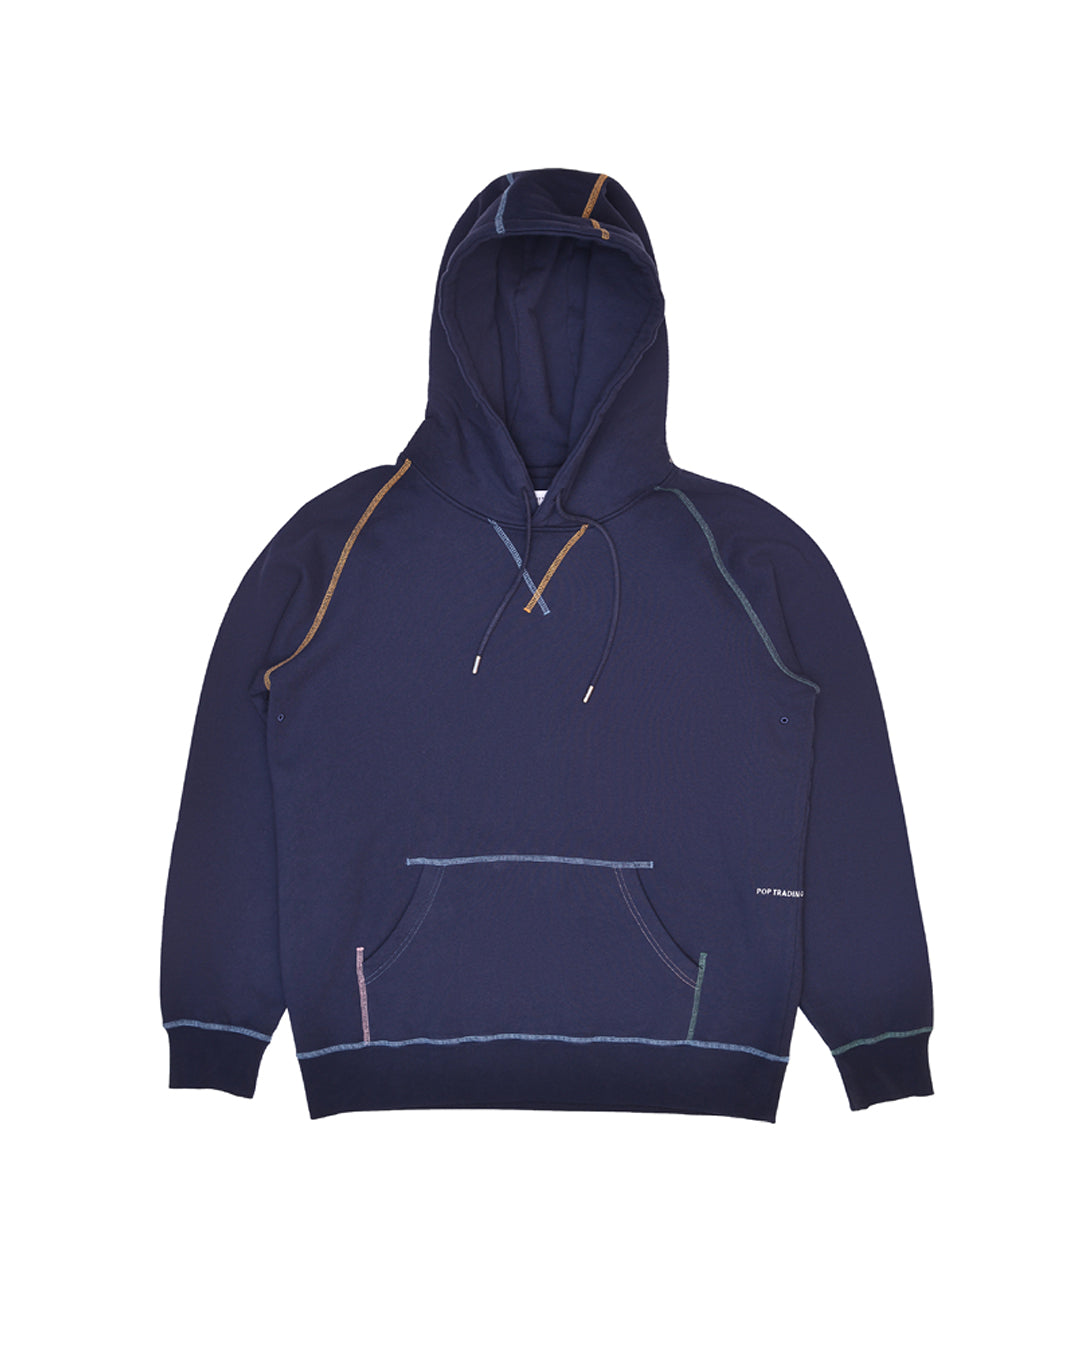 LOGO EMBROIDERED HOODIE NAVY